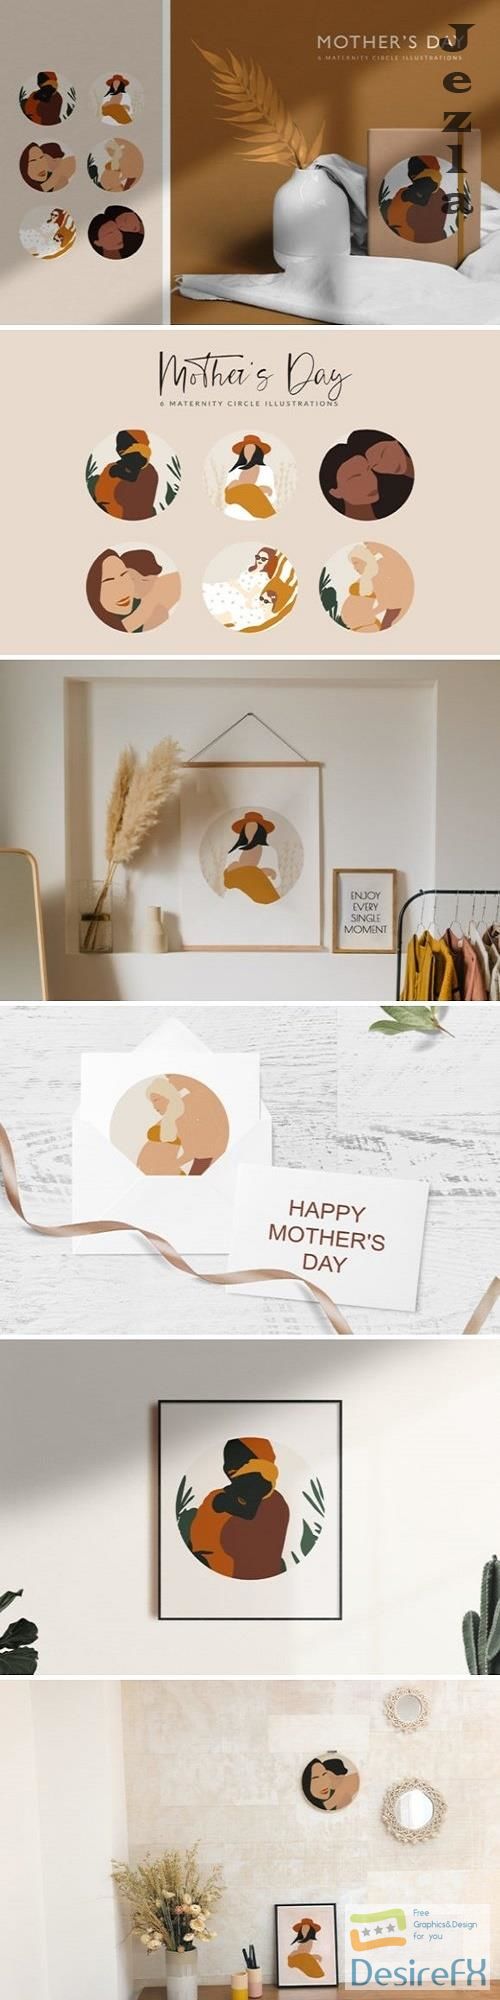 Mother's Day Abstract Illustrations - 4748020